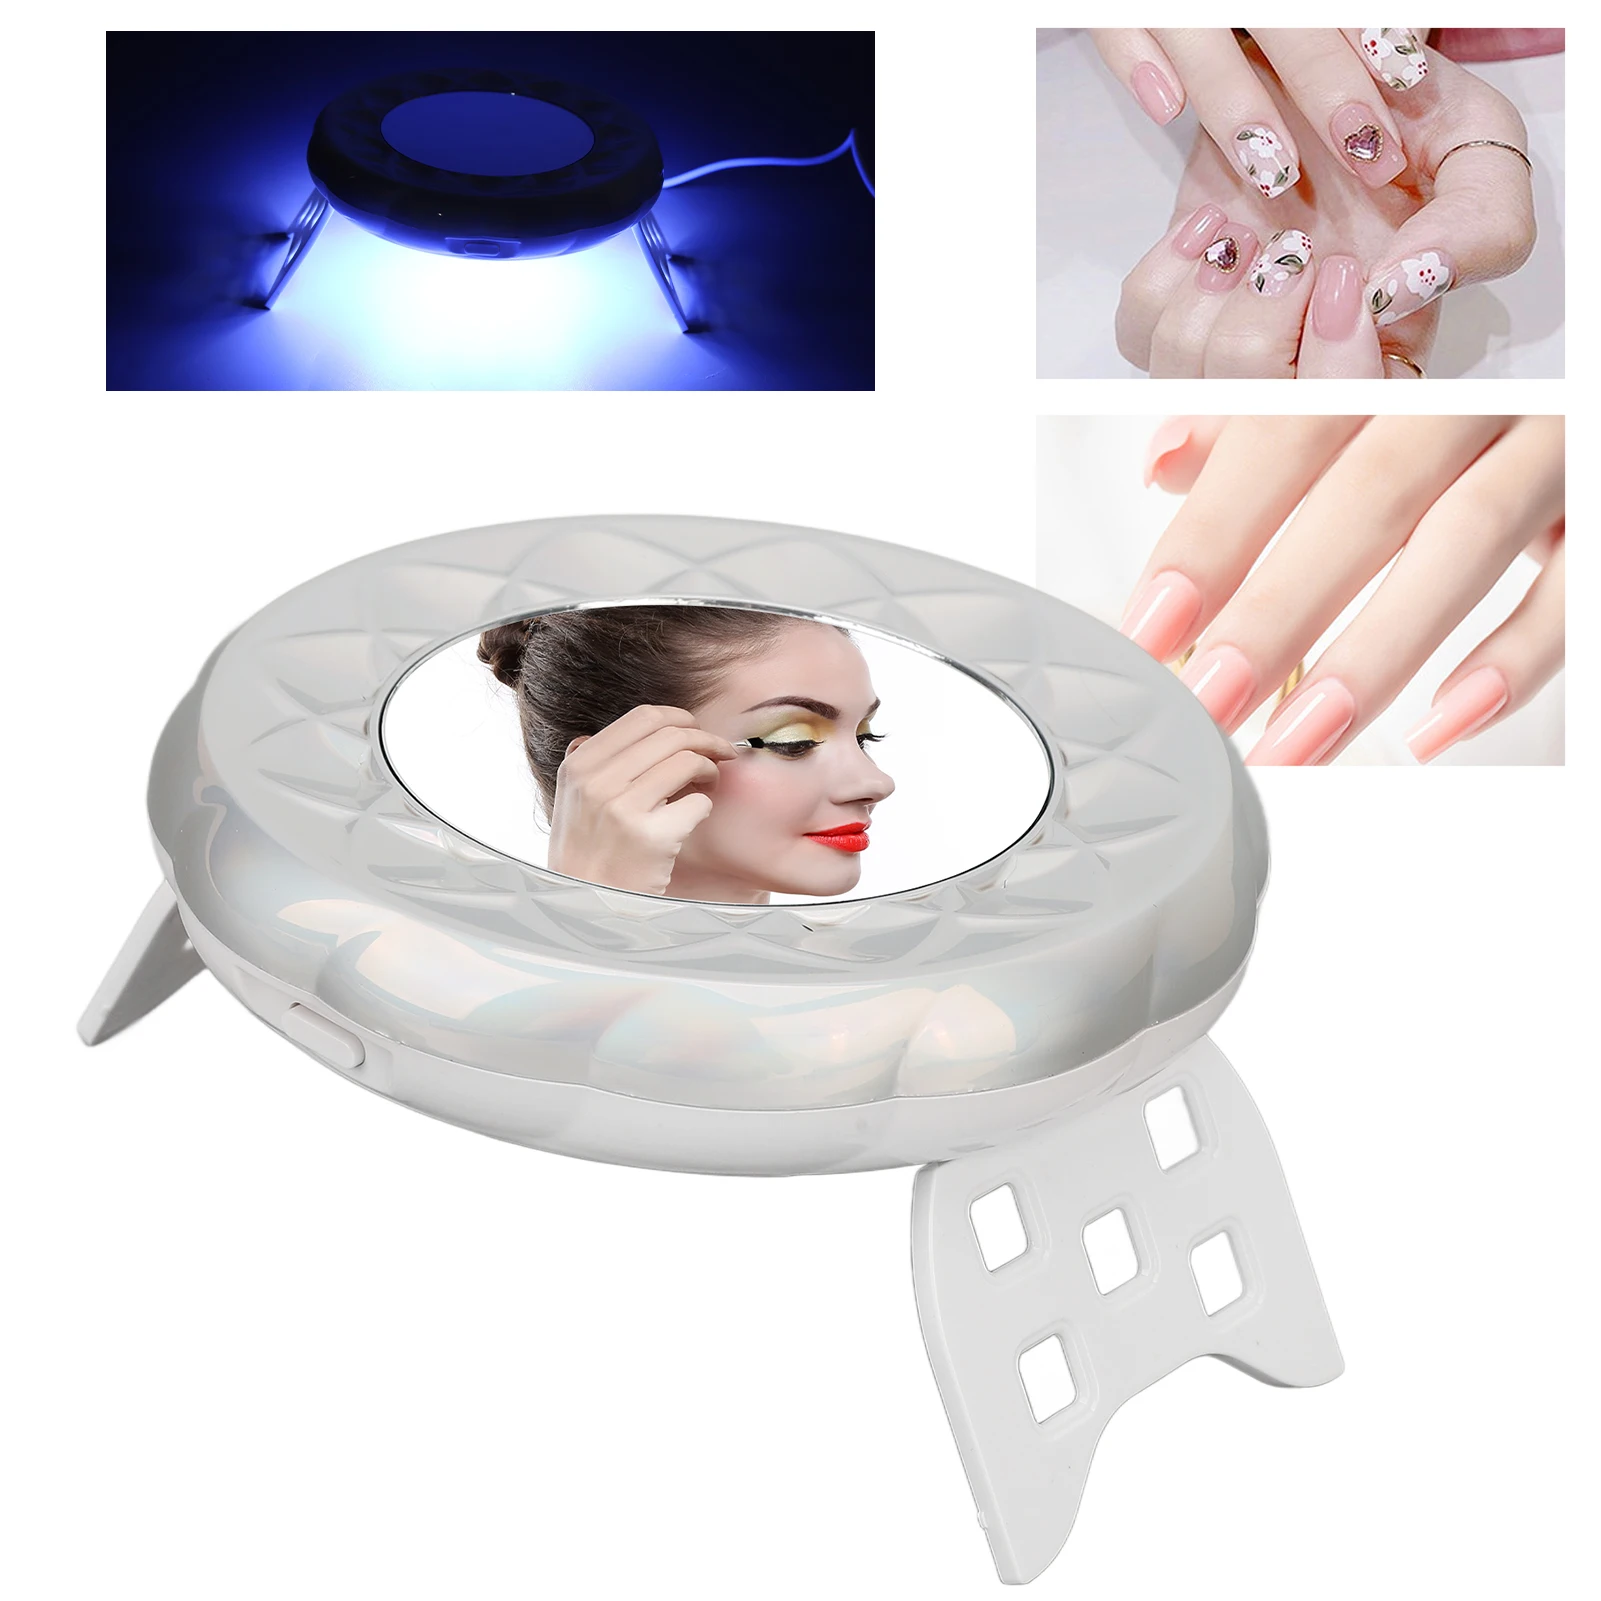 

18W Foldable Nail Dryer Lamp with Mirror 18pcs Light Chips Portable USB Charging Nail Gel Polish Curing Light Manicure Tool